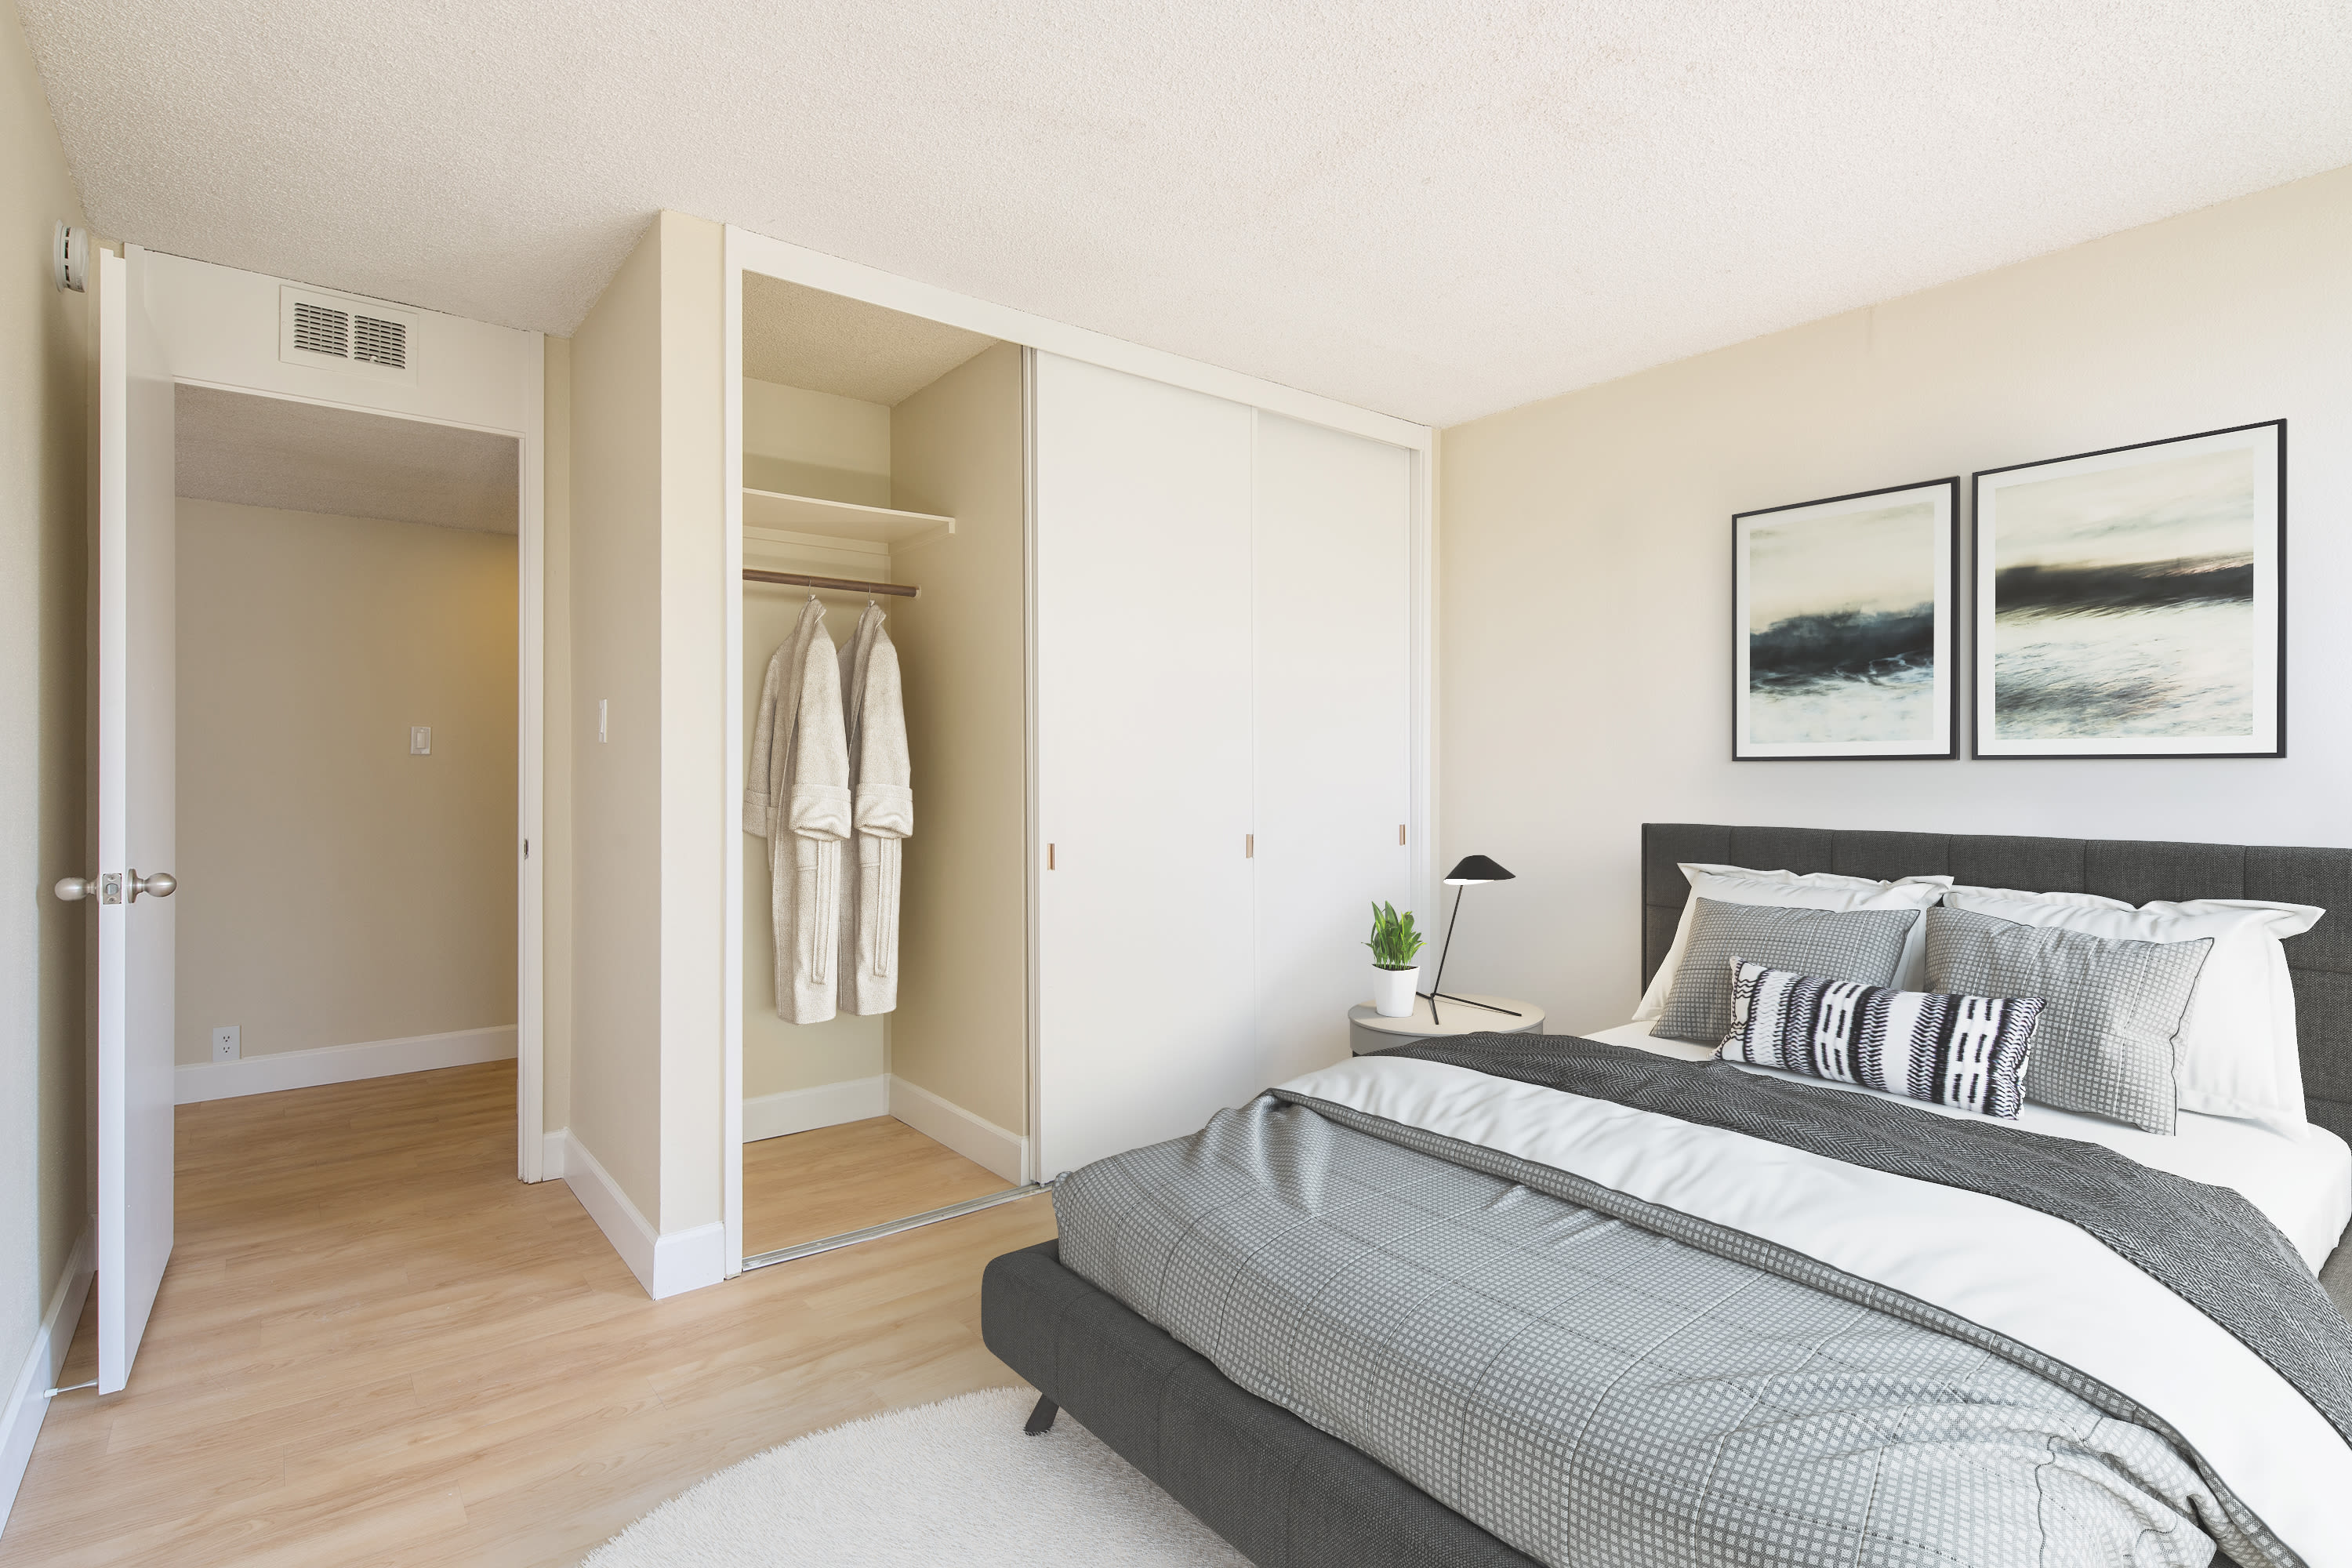 Bedroom and closet at Skyline Terrace Apartments in Burlingame, California